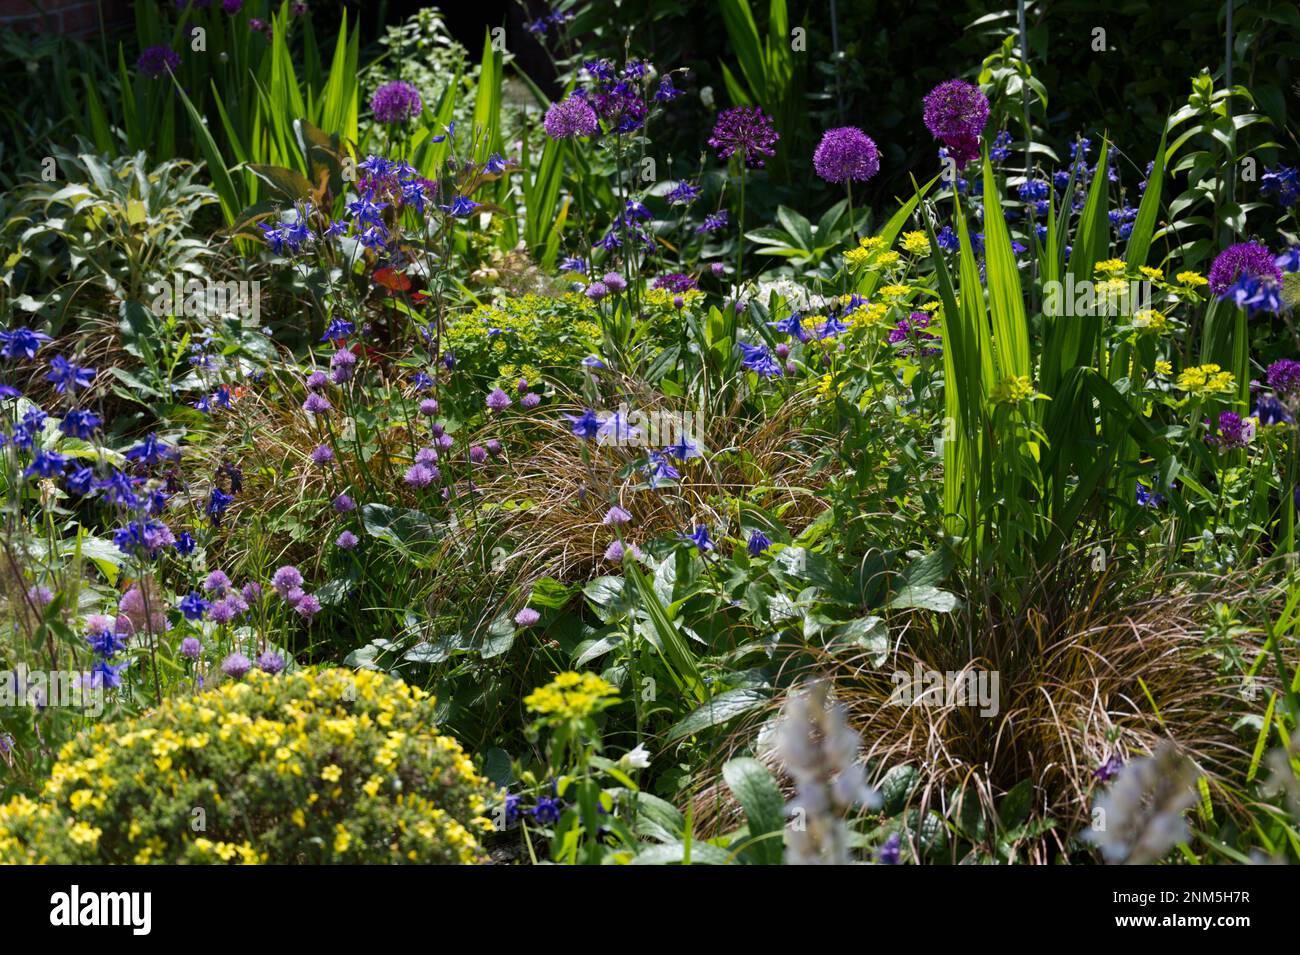 summer border with alliums, euphorbia, aquilegia, chives, bronze carex and many others UK June Stock Photo